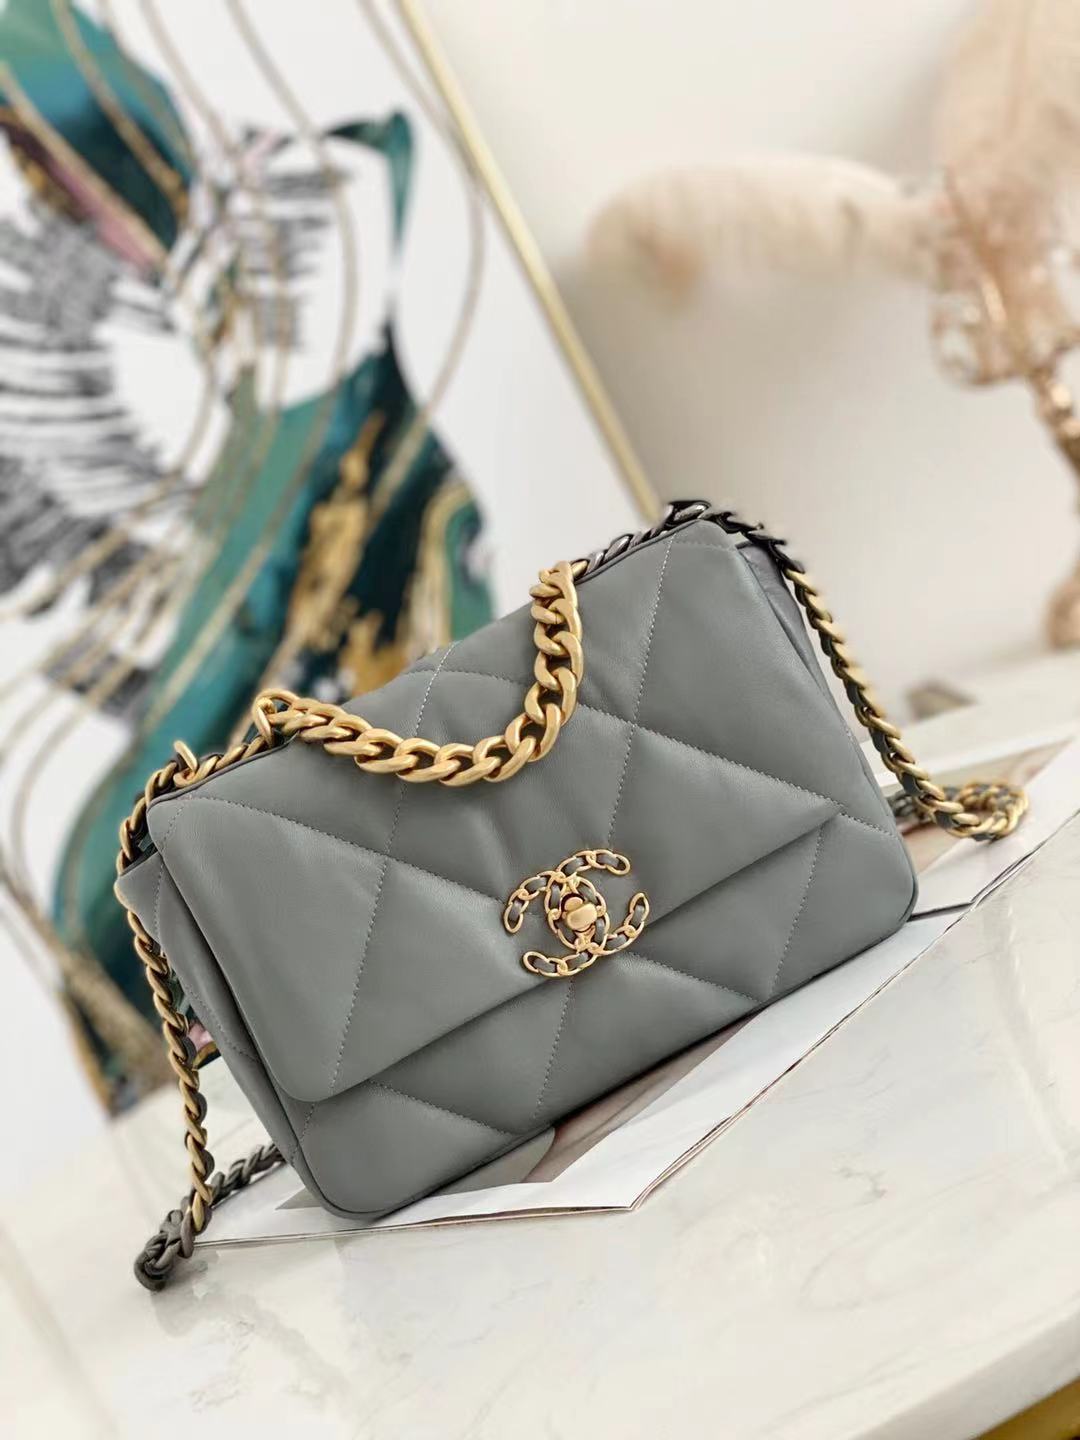 CHANEL 19 Flap Bag AS1160 AS1161 AS1162 grey